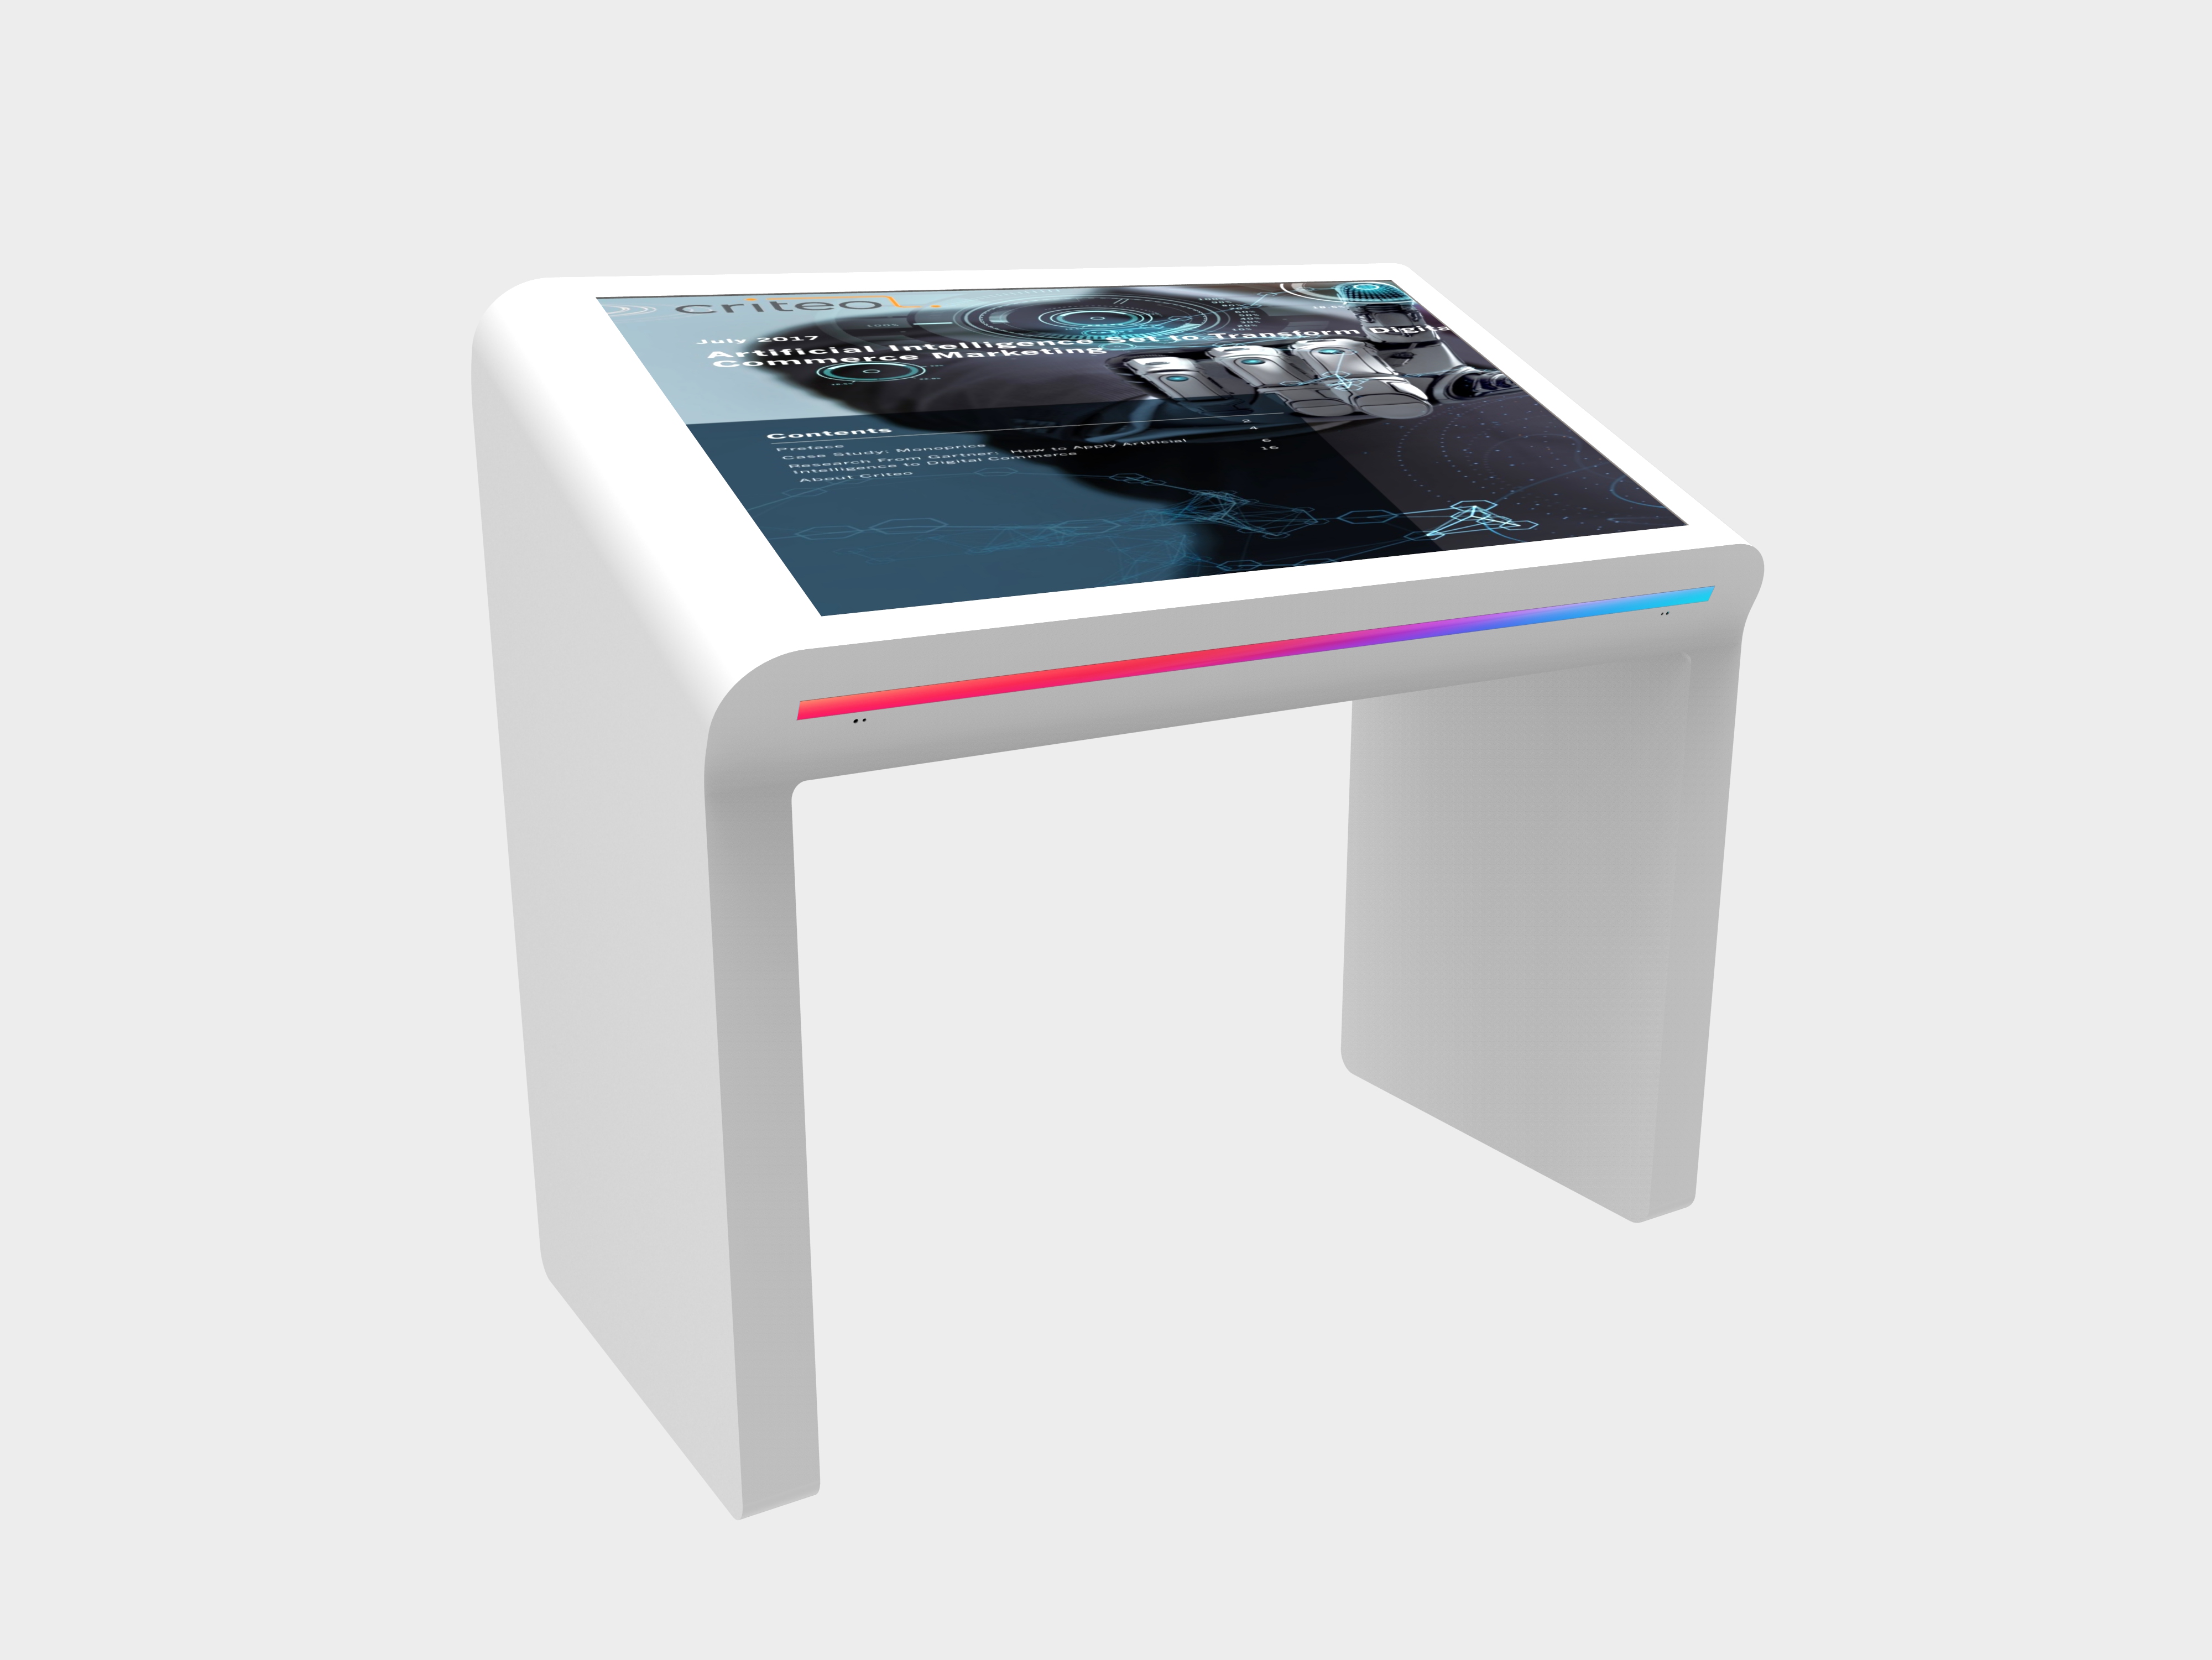 49" Slanted Touch Screen Kiosk with LED Edge-Lit Panel